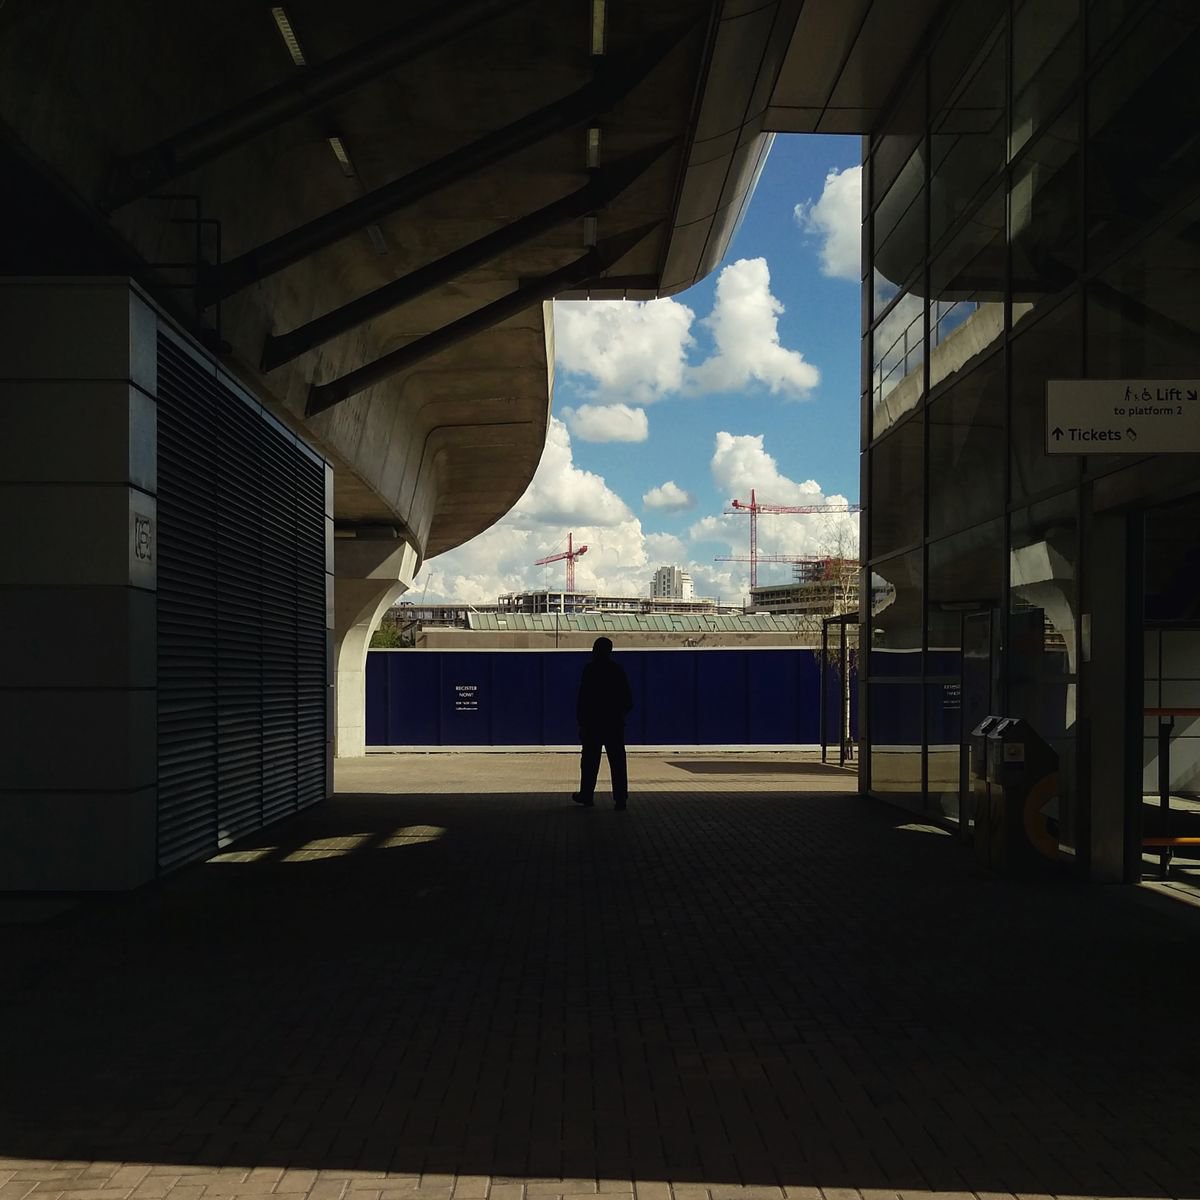 A Year In London / DLR Selection - Framed Edition Of 1 (2016) by Amadeus Long